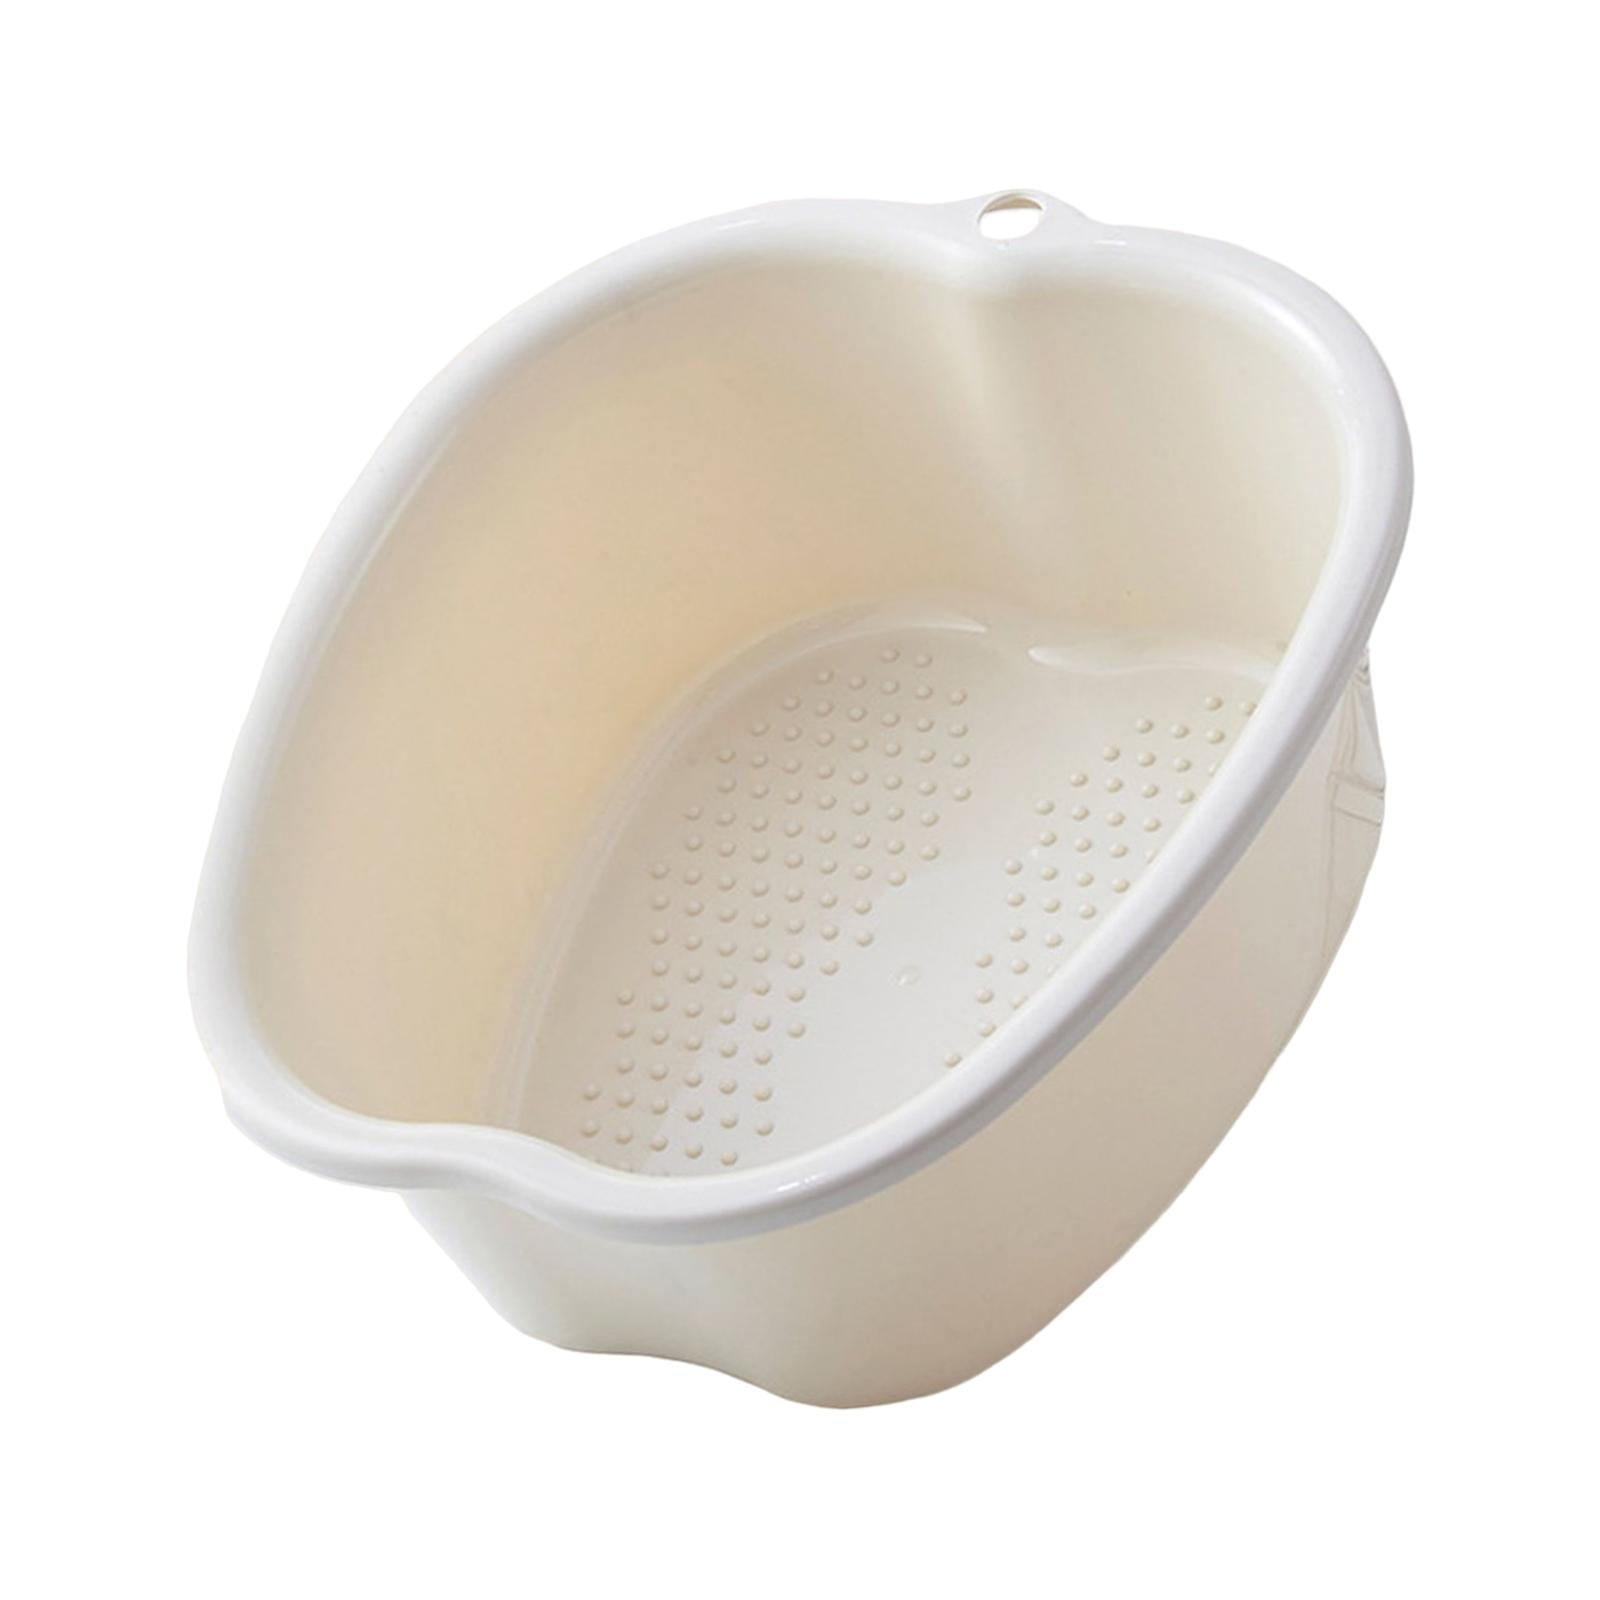 Basicwise Foot Massage Spa Bath Bucket with Cover QI003324 - The Home Depot